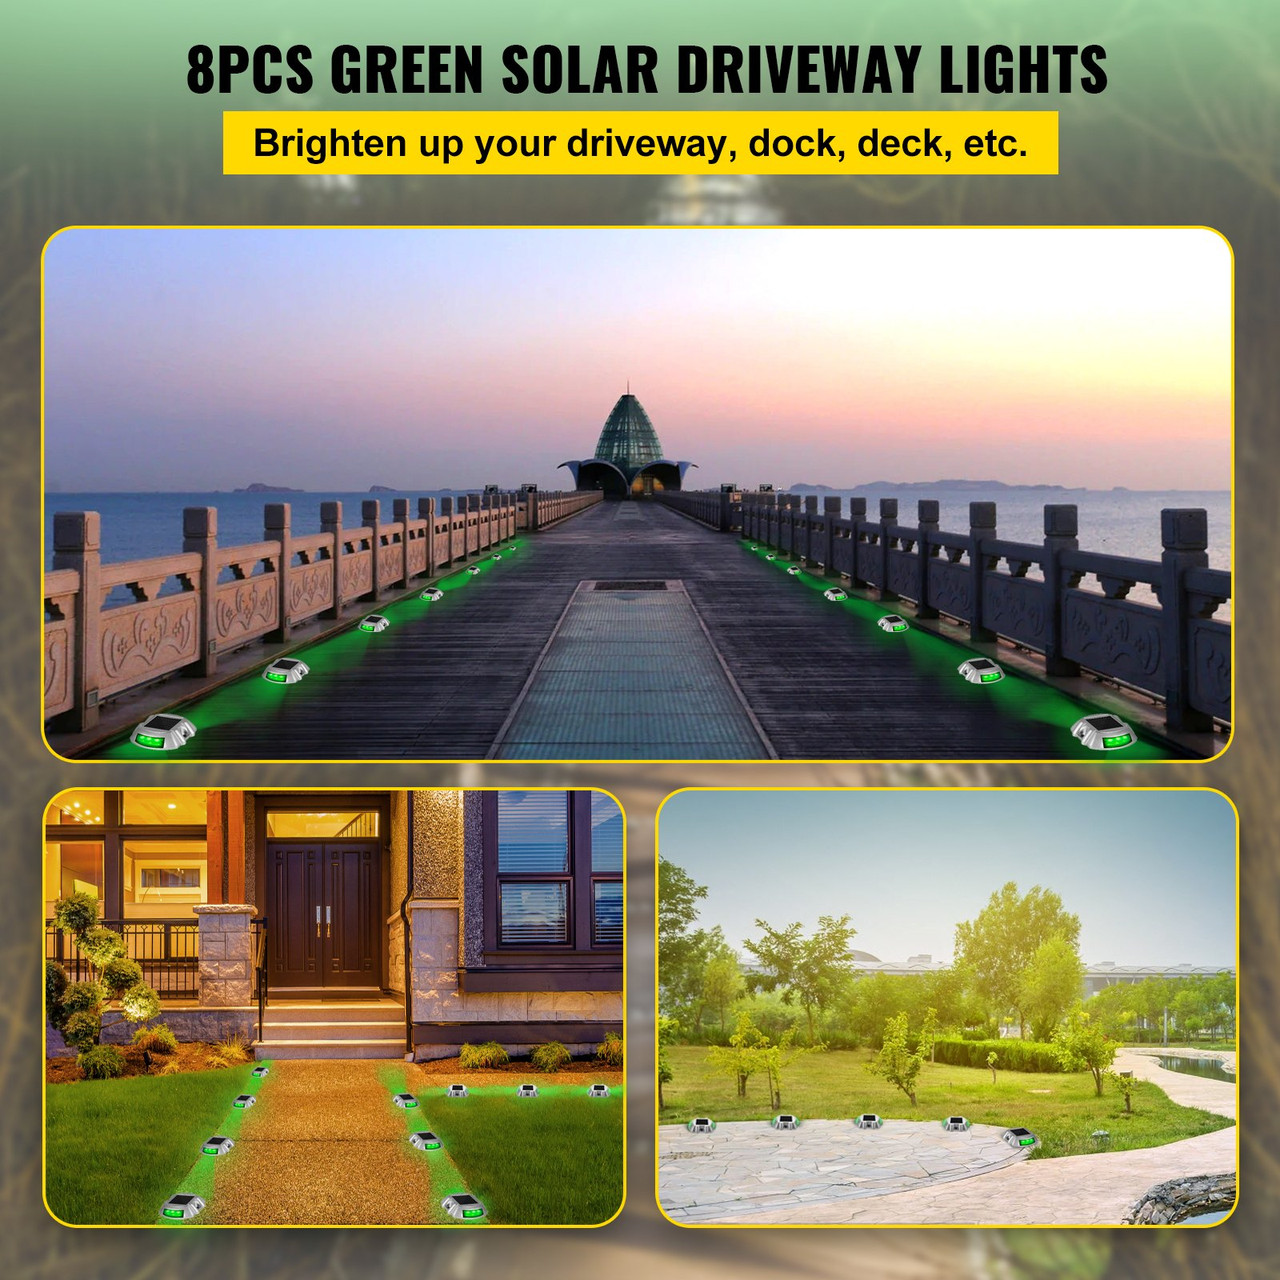 Driveway Lights, 8-Pack Solar Driveway Lights with Switch Button, Solar Deck Lights Waterproof, Wireless Dock Lights 6 LEDs for Path Warning Garden Walkway Sidewalk Steps, LED Bright Green